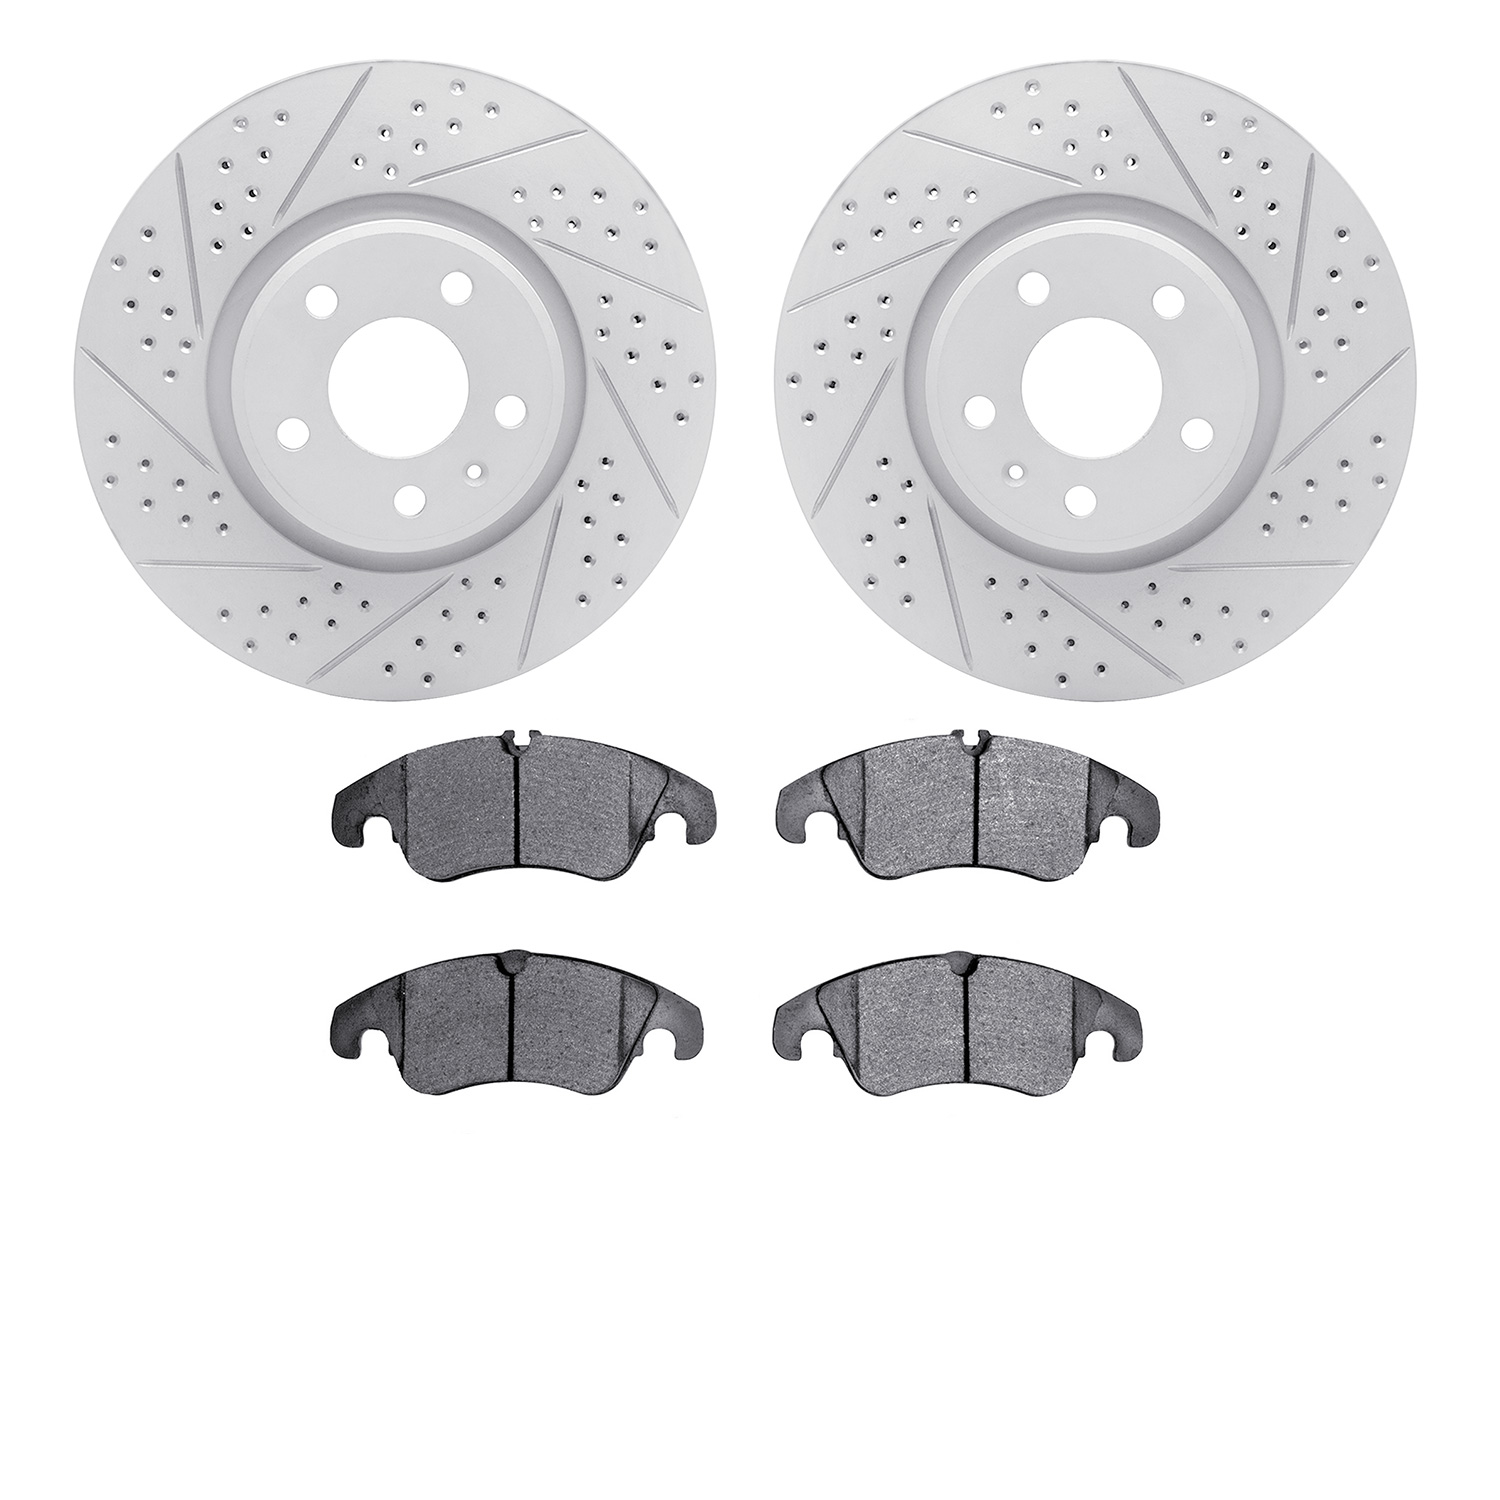 2502-73065 Geoperformance Drilled/Slotted Rotors w/5000 Advanced Brake Pads Kit, 2012-2017 Audi/Volkswagen, Position: Front